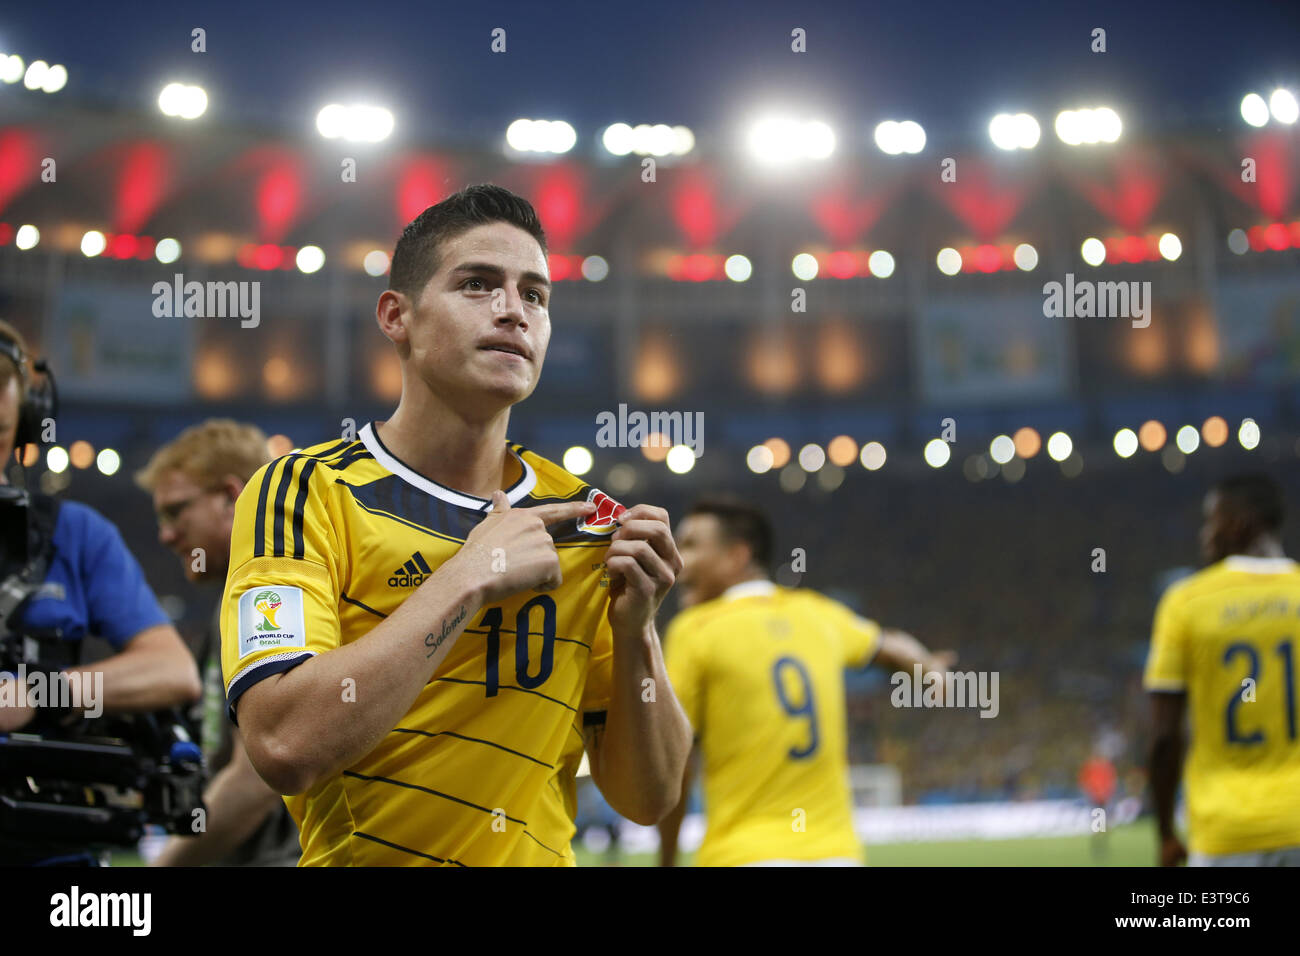 Rio De Janeiro, Brazil. 28th June, 2014. Colombia's James Rodriguez celebrates a goal during a Round of 16 match between Colombia and Uruguay of 2014 FIFA World Cup at the Estadio do Maracana Stadium in Rio de Janeiro, Brazil, on June 28, 2014. Colombia won 2-0 over Uruguay and qualified for Quarter-finals on Saturday. Credit:  Wang Lili/Xinhua/Alamy Live News Stock Photo